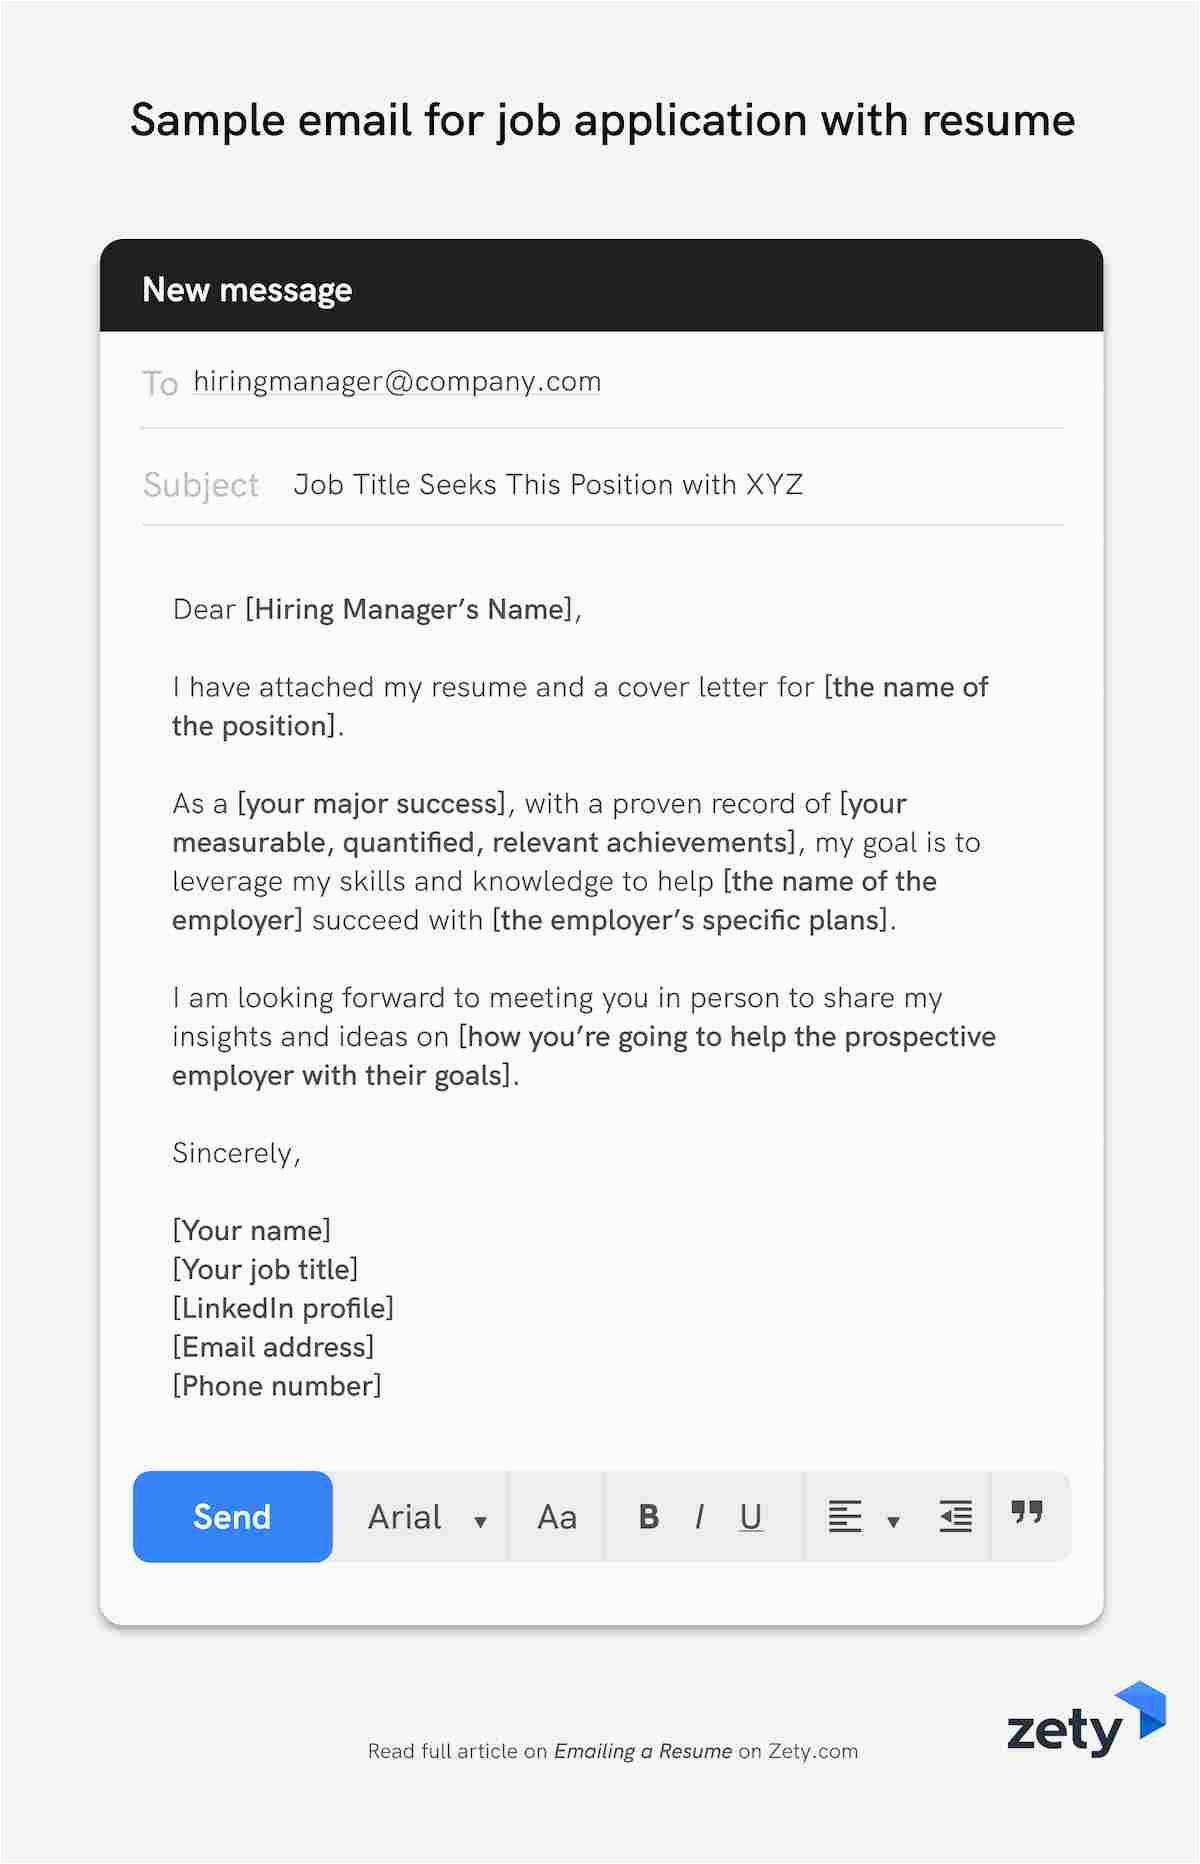 Sample Email Resume to Potential Employer How to Email A Resume to An Employer 12 Email Examples